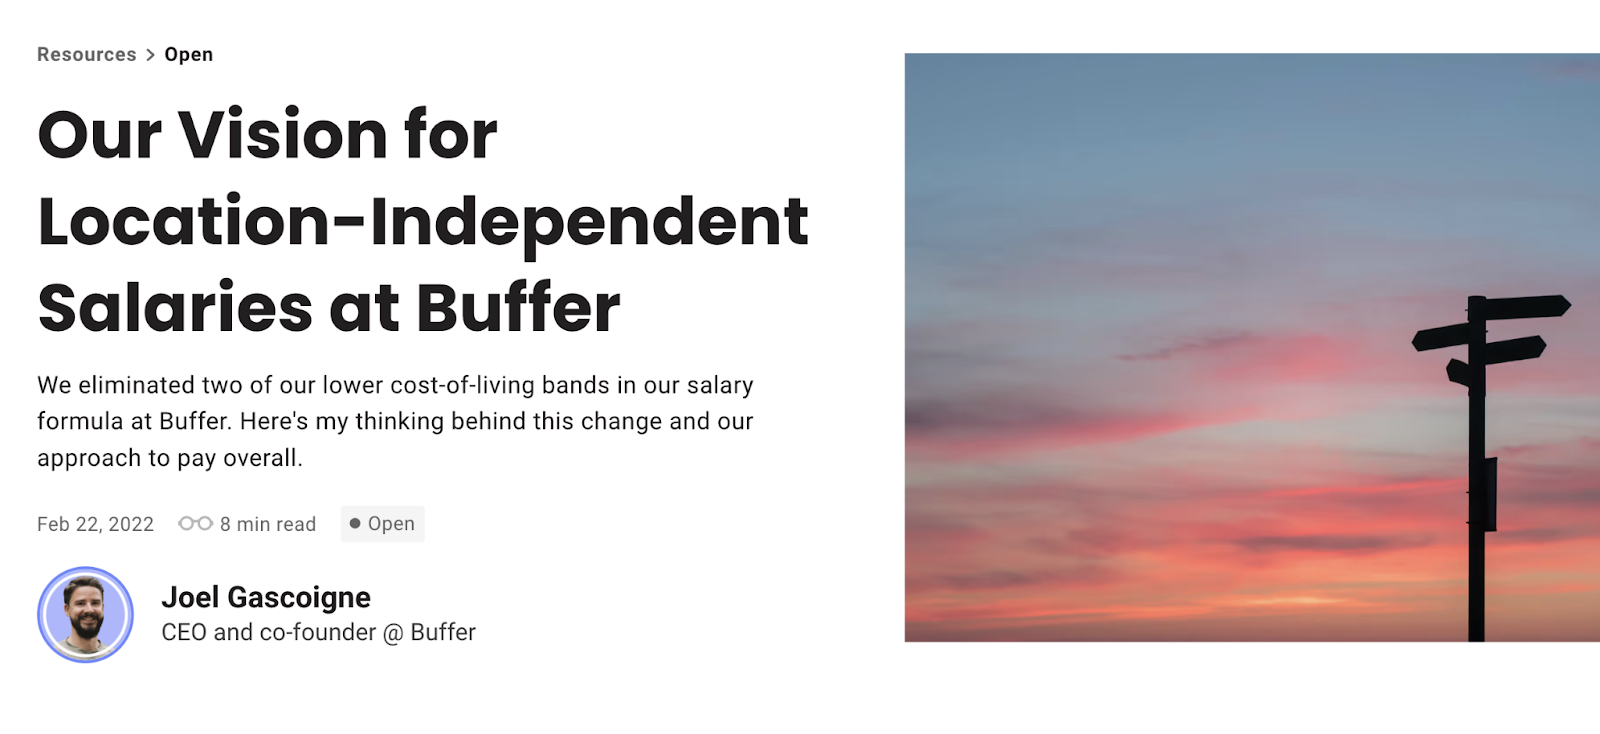 Joel Gascoigne's blog titled "Our Vision for Location-Independent Salaries at Buffer"